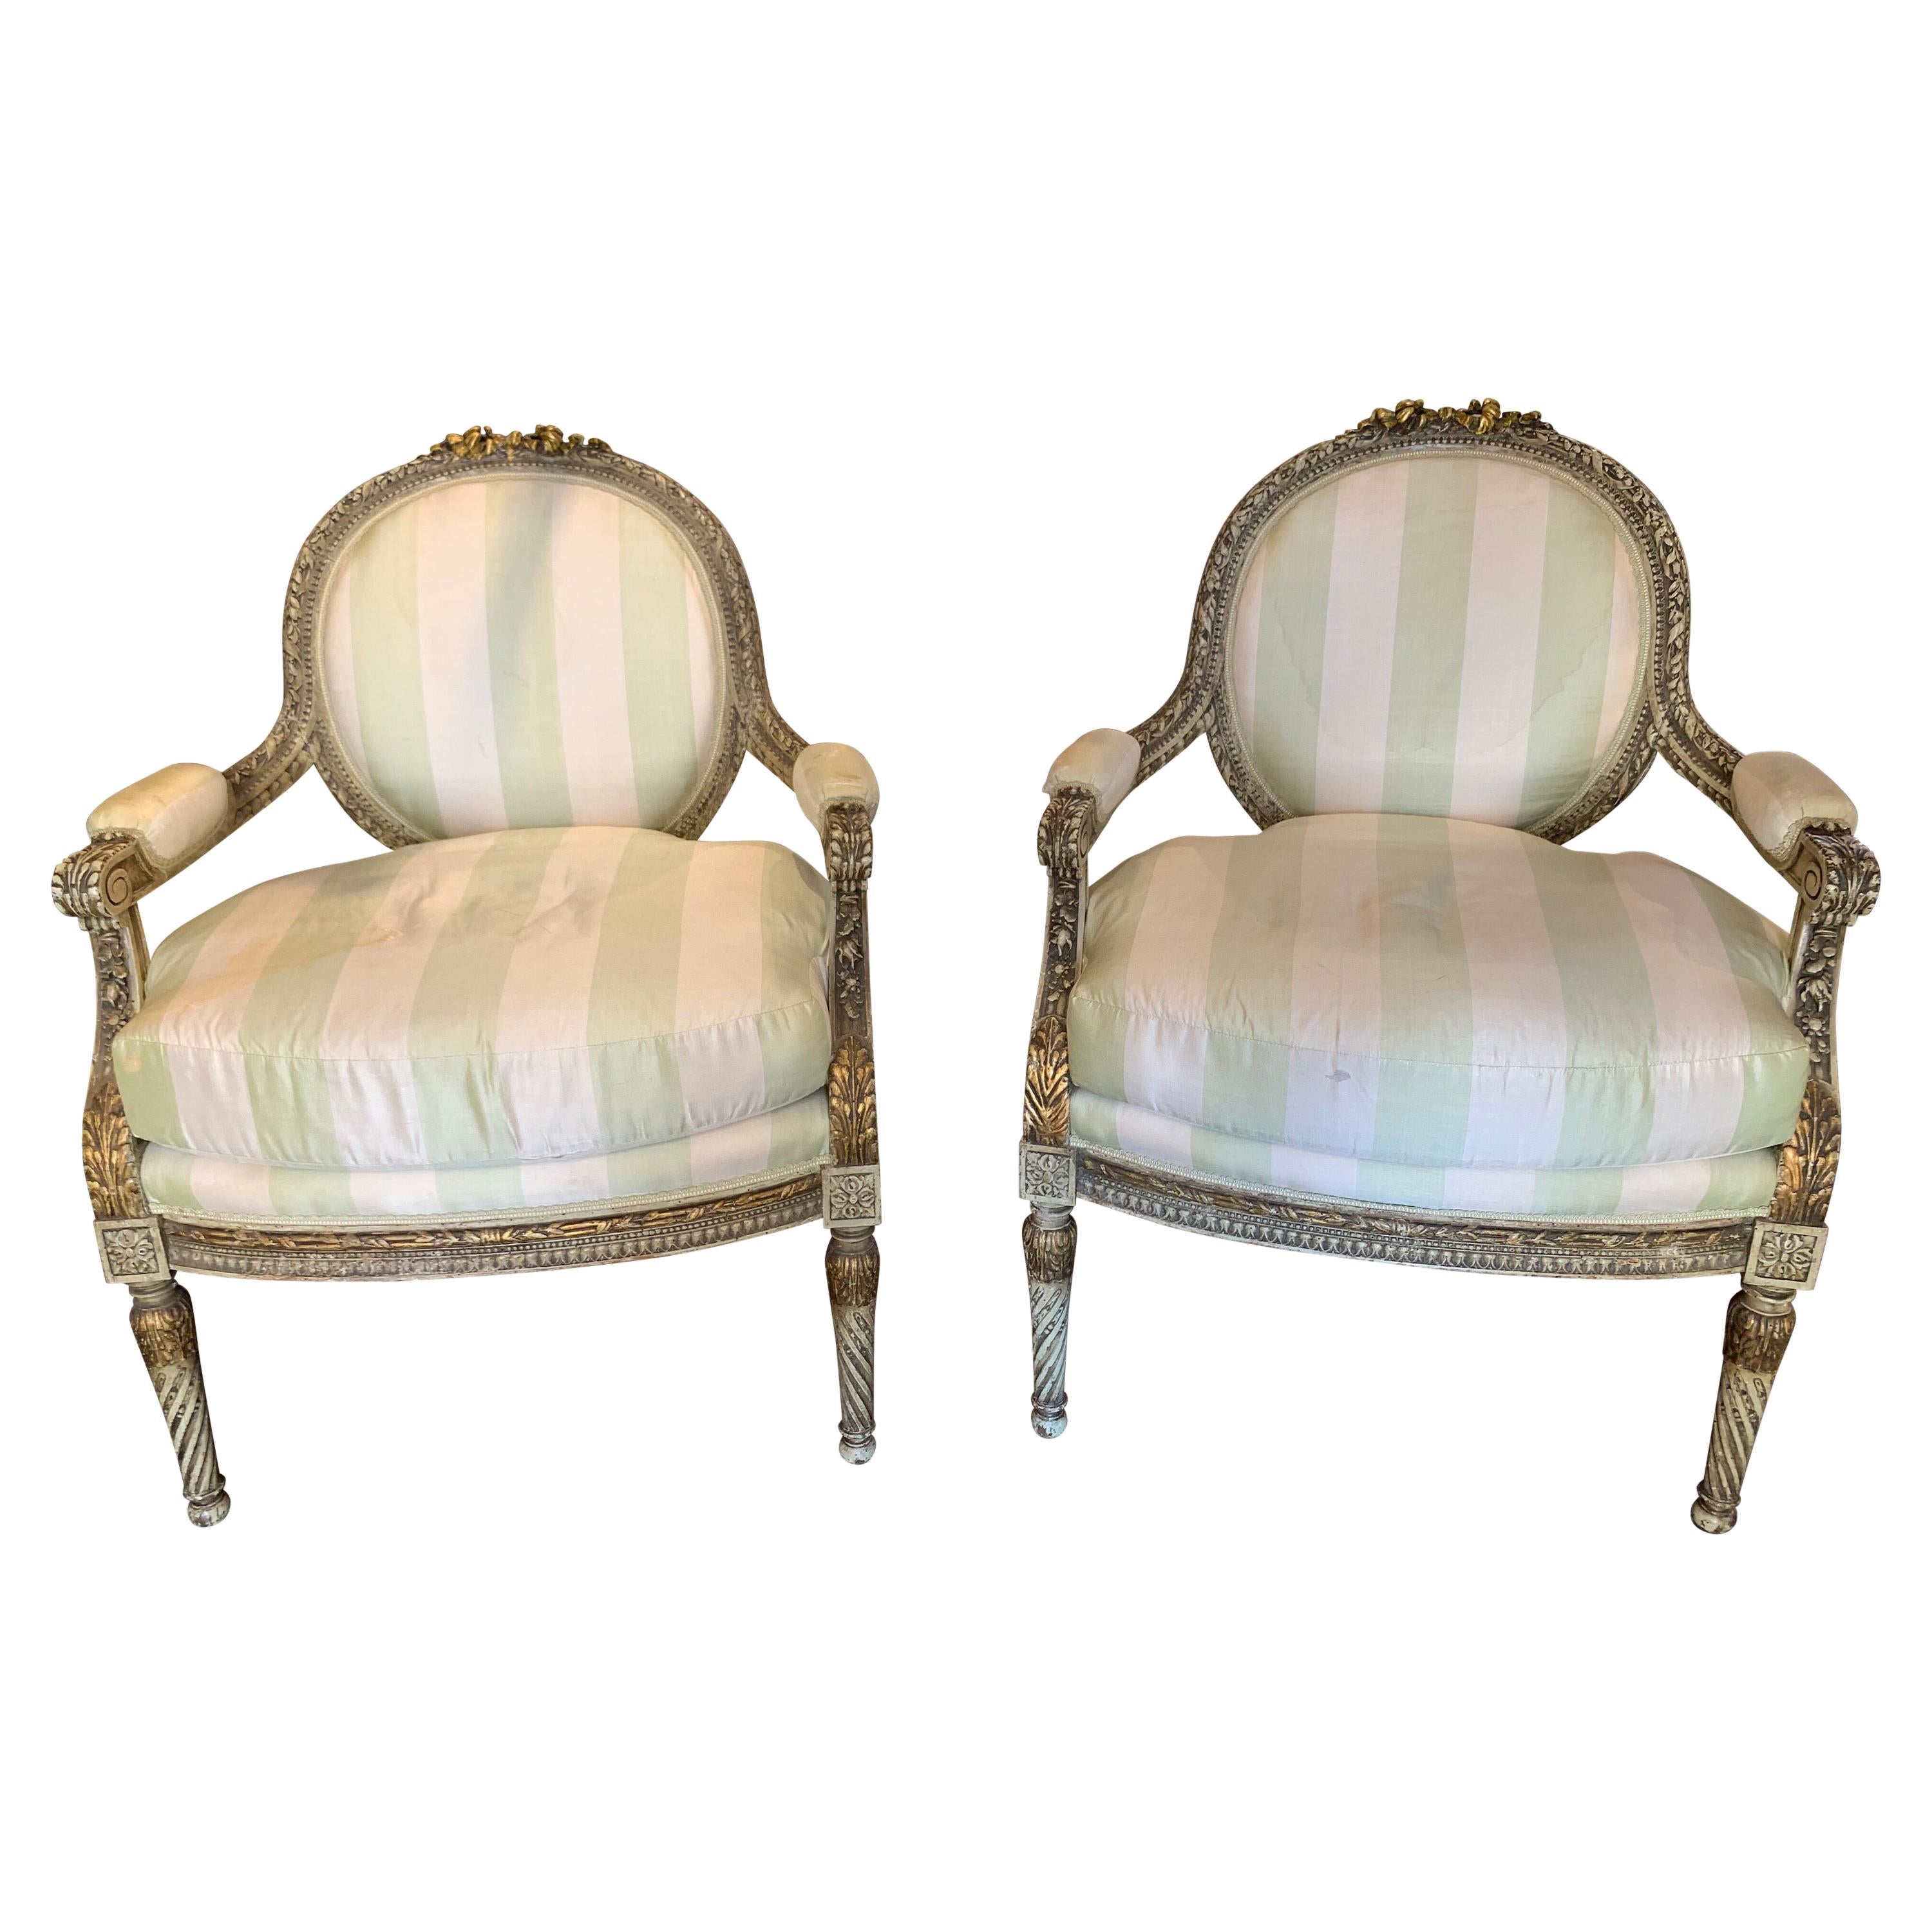 Pair of 19th Century French Louis XVI Fauteuils